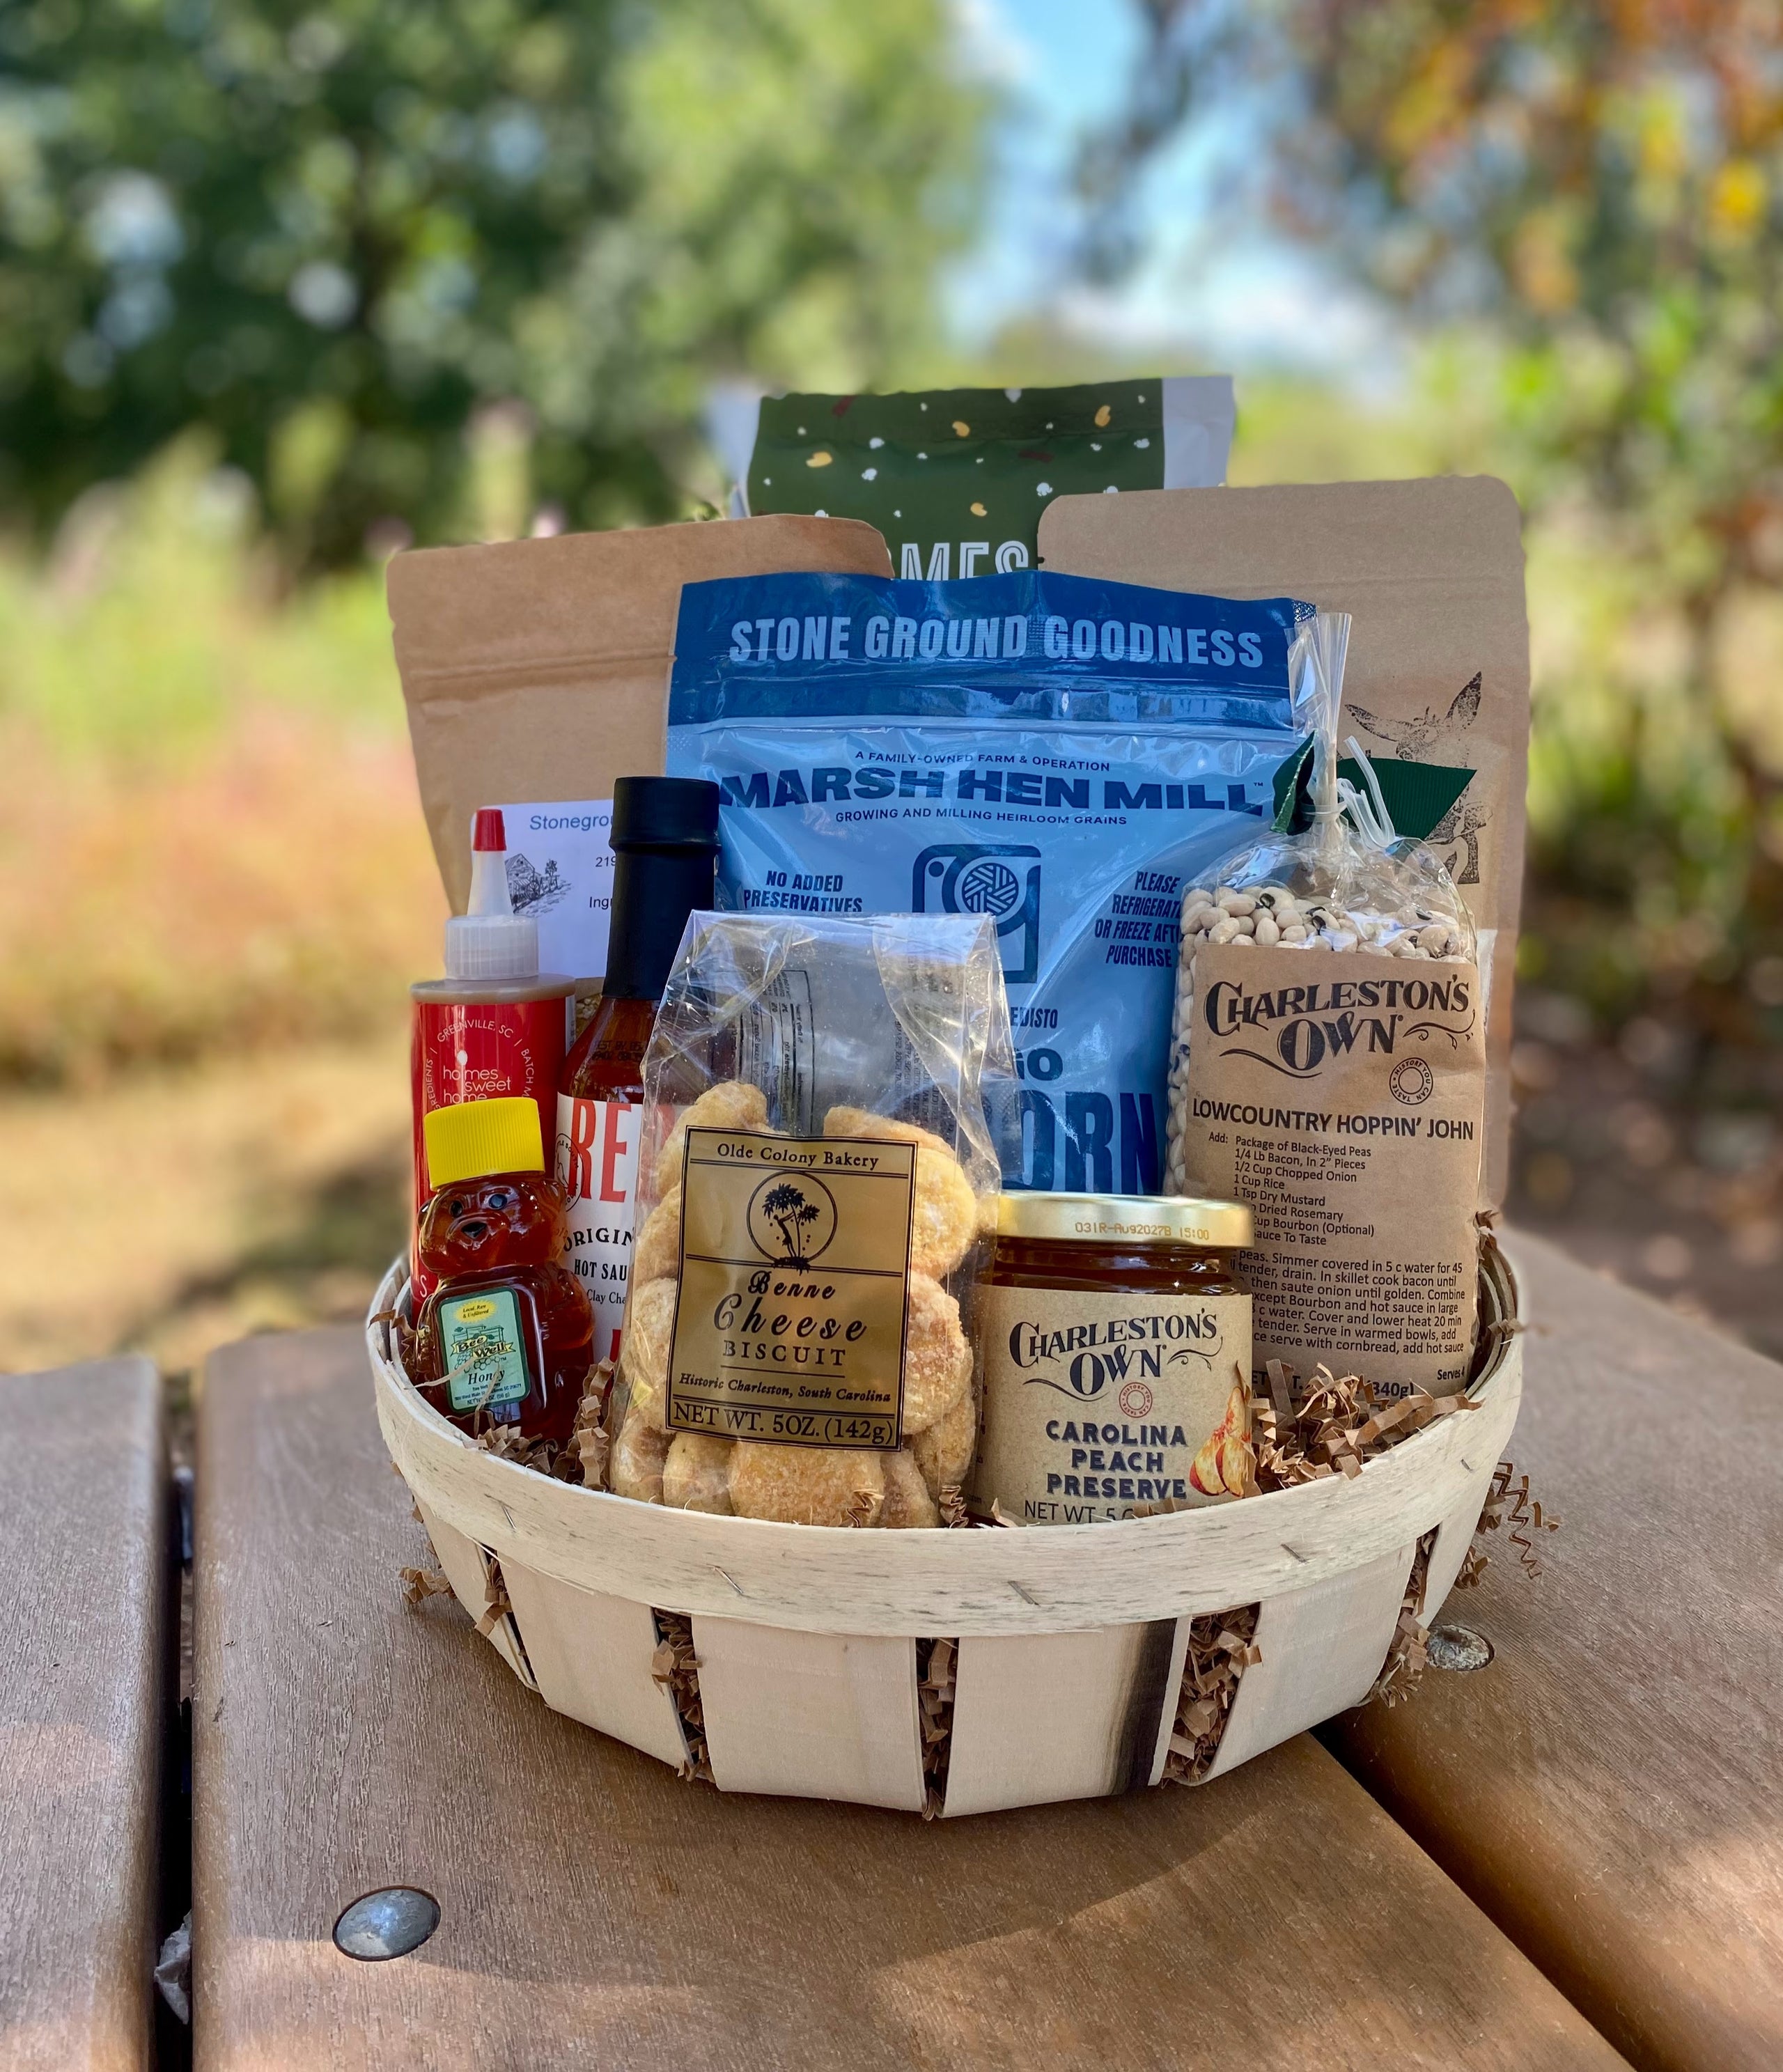 New Home Gift Basket - Large